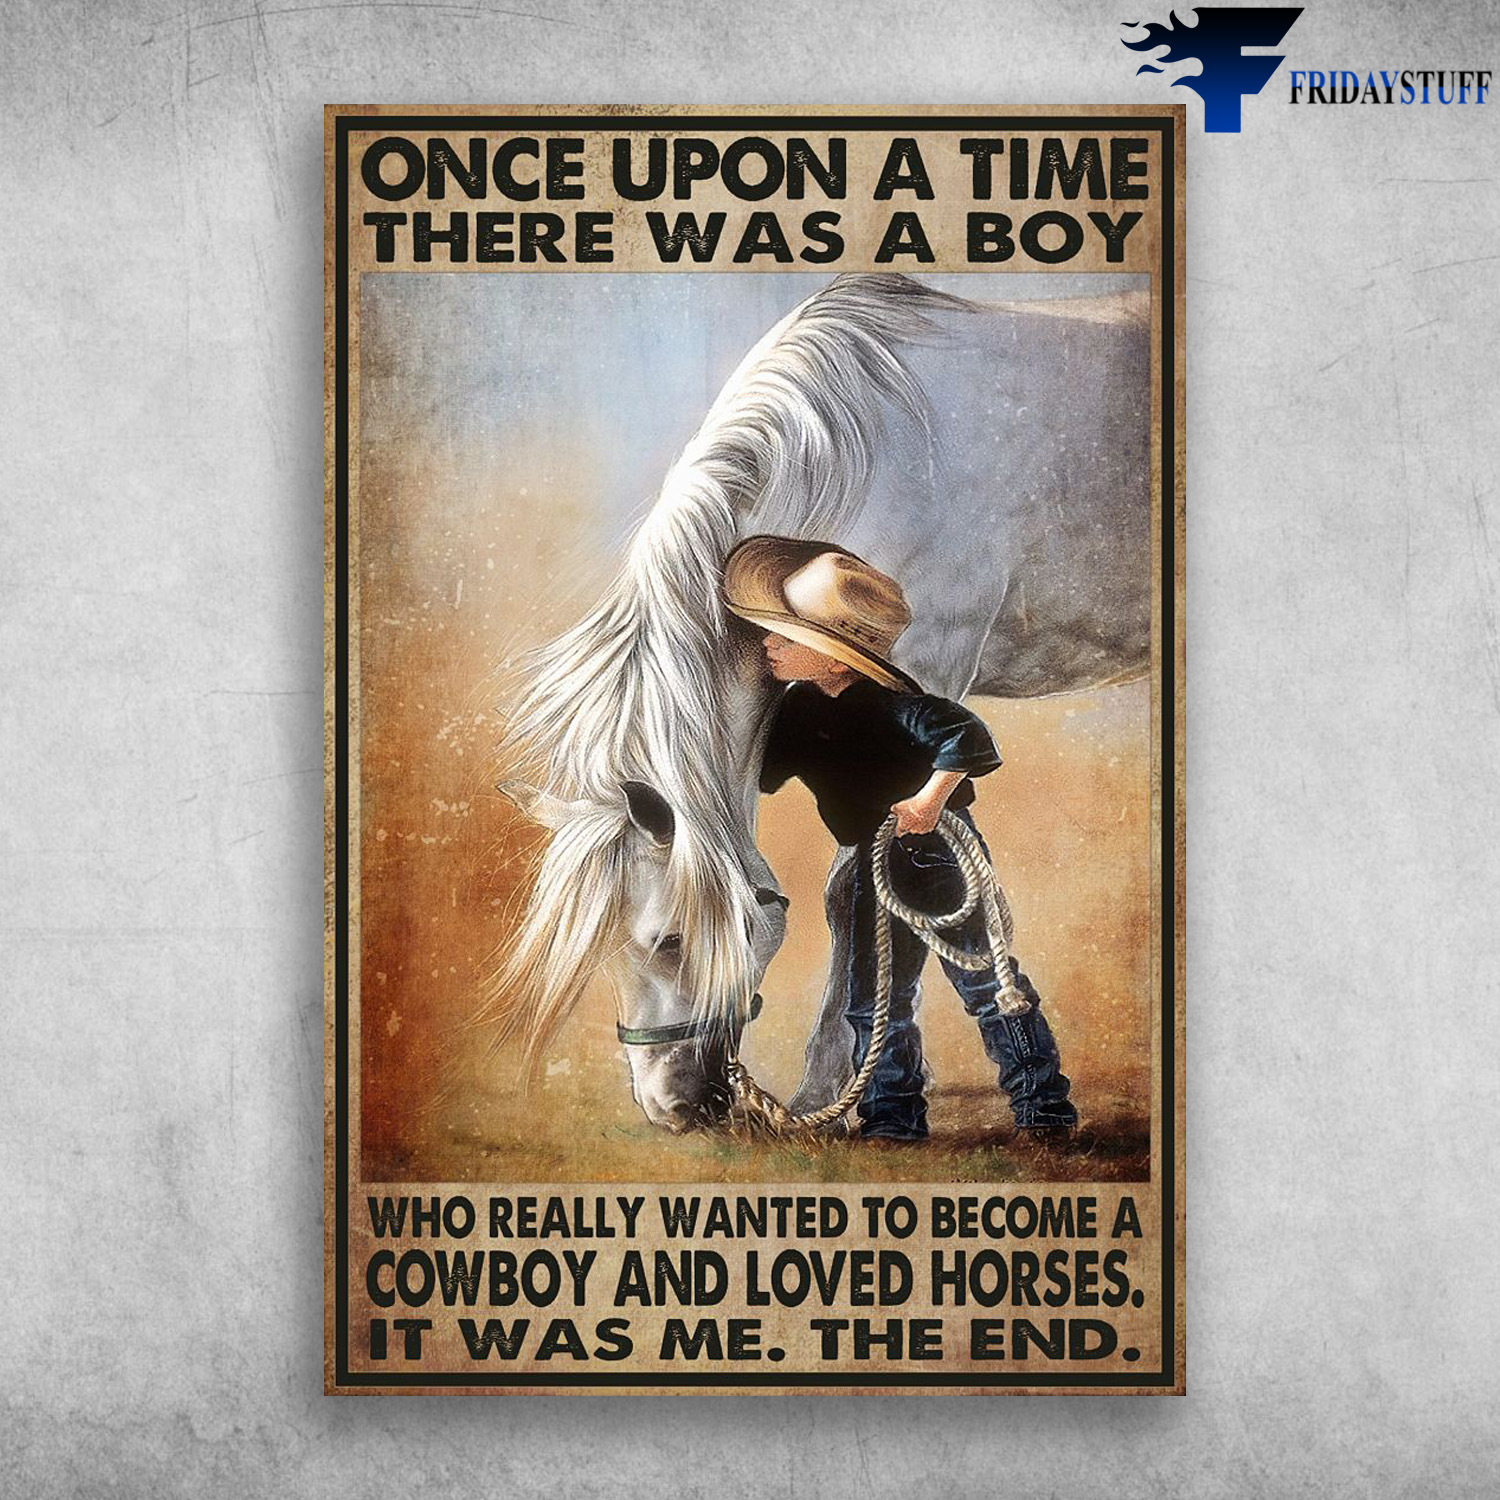 Little Boy And White Horse, Once Upon A Time, There Was A Boy, Who Really Wanted To Become A Cowboy And Loved Horses, It Was Me, The End